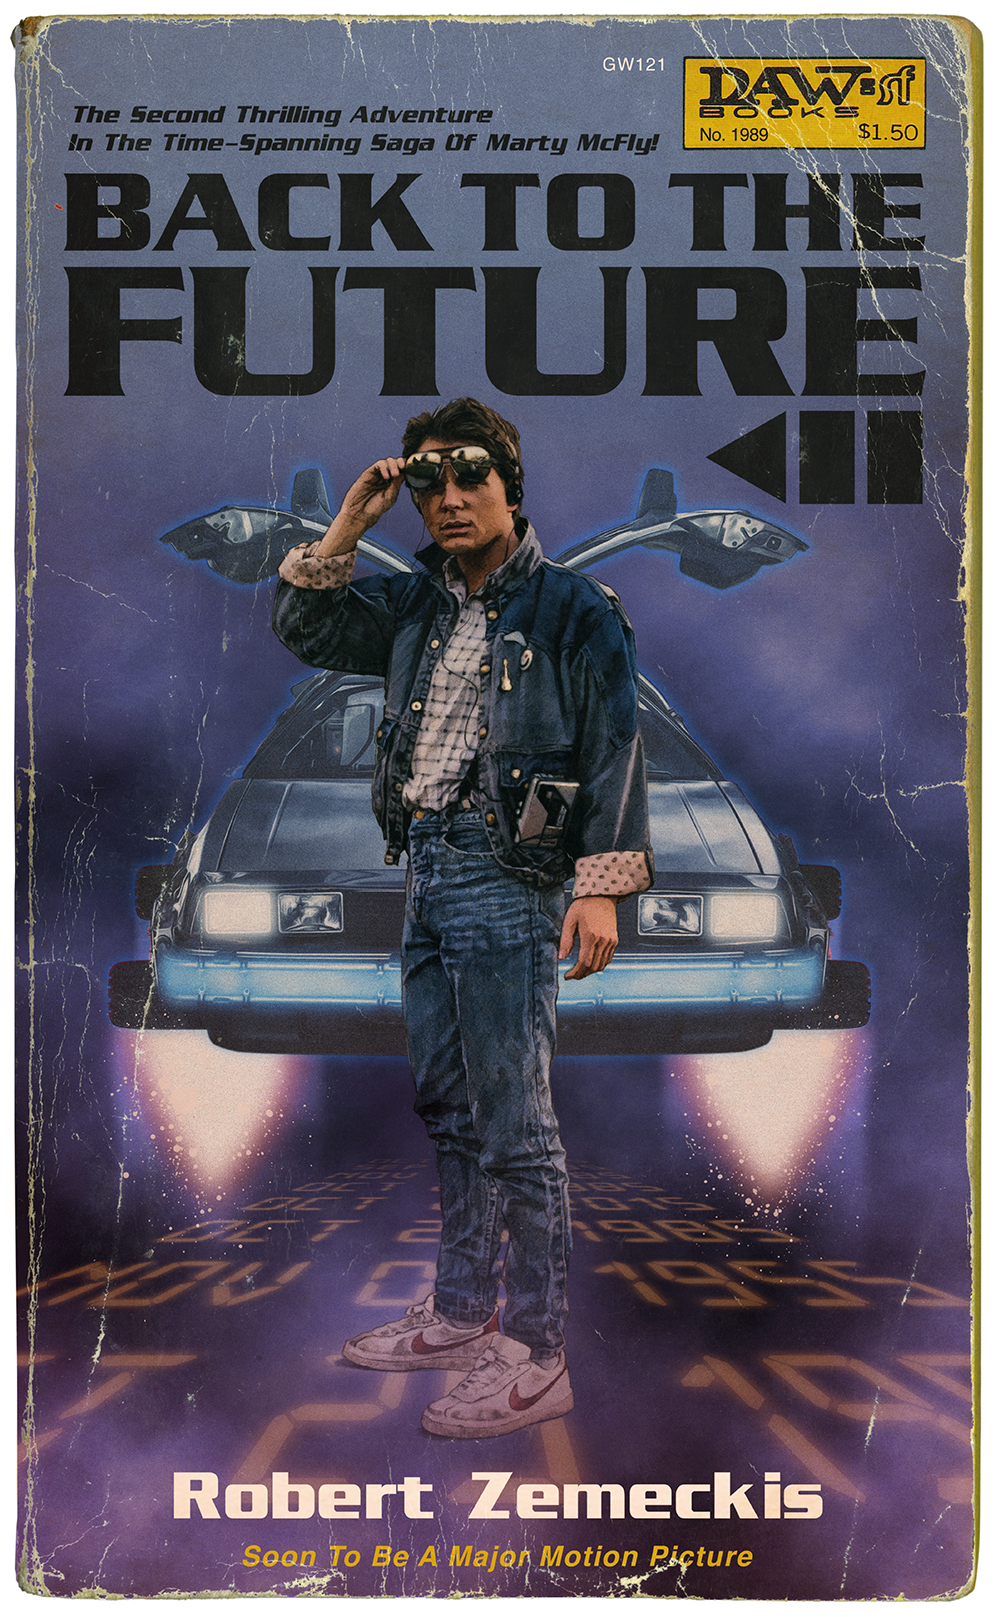 books in back to the future - The The Adventure In The TimeSprings Or Marty Mc Raw sf Back To The Future Robert Zemeckis Soon To Be A Majon Motion Picture